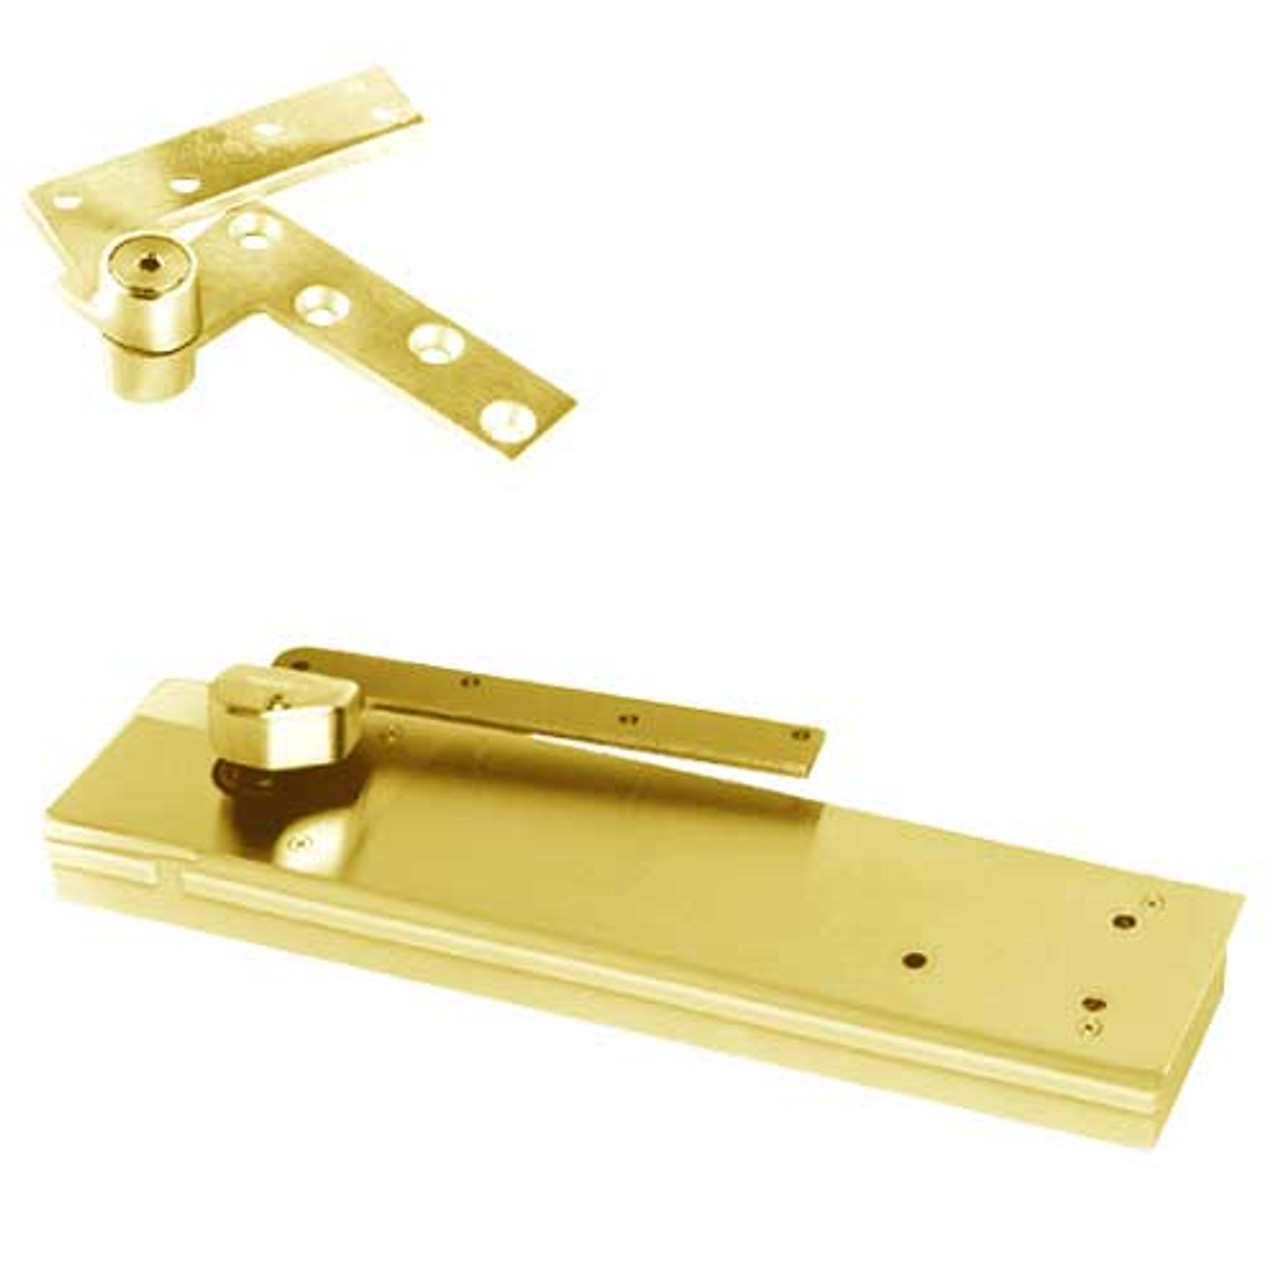 5103ABC180-1-1/2OS-LFP-LH-605 Rixson 51 Series 1-1/2" Offset Hung Shallow Depth Floor Closers in Bright Brass Finish